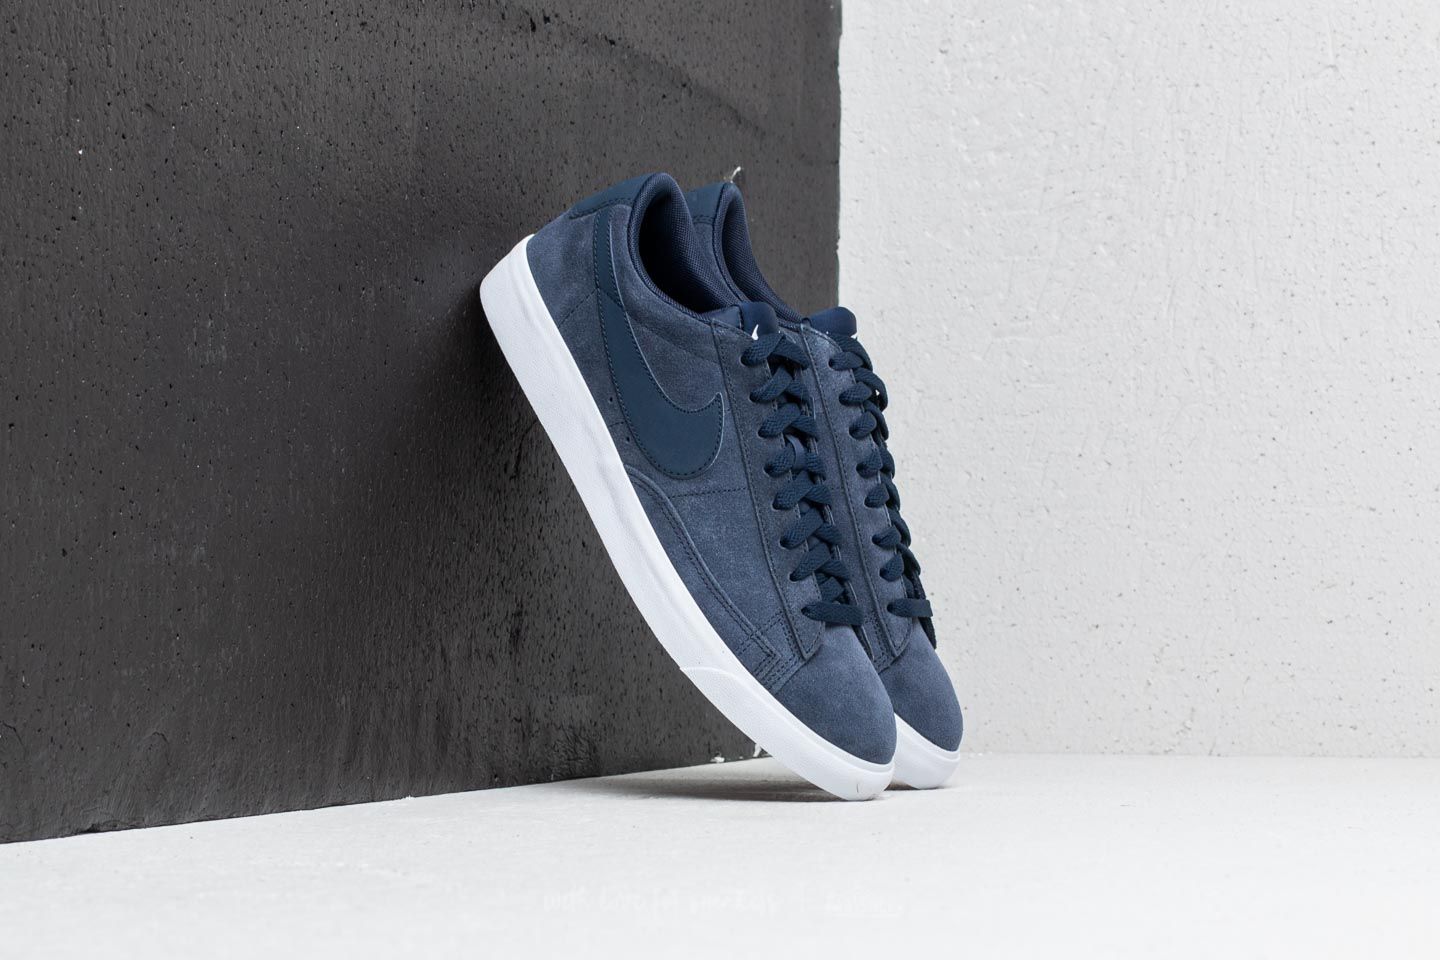 Chaussures et baskets homme Nike Blazer Low Suede Obsidian/ Obsidian-Sail